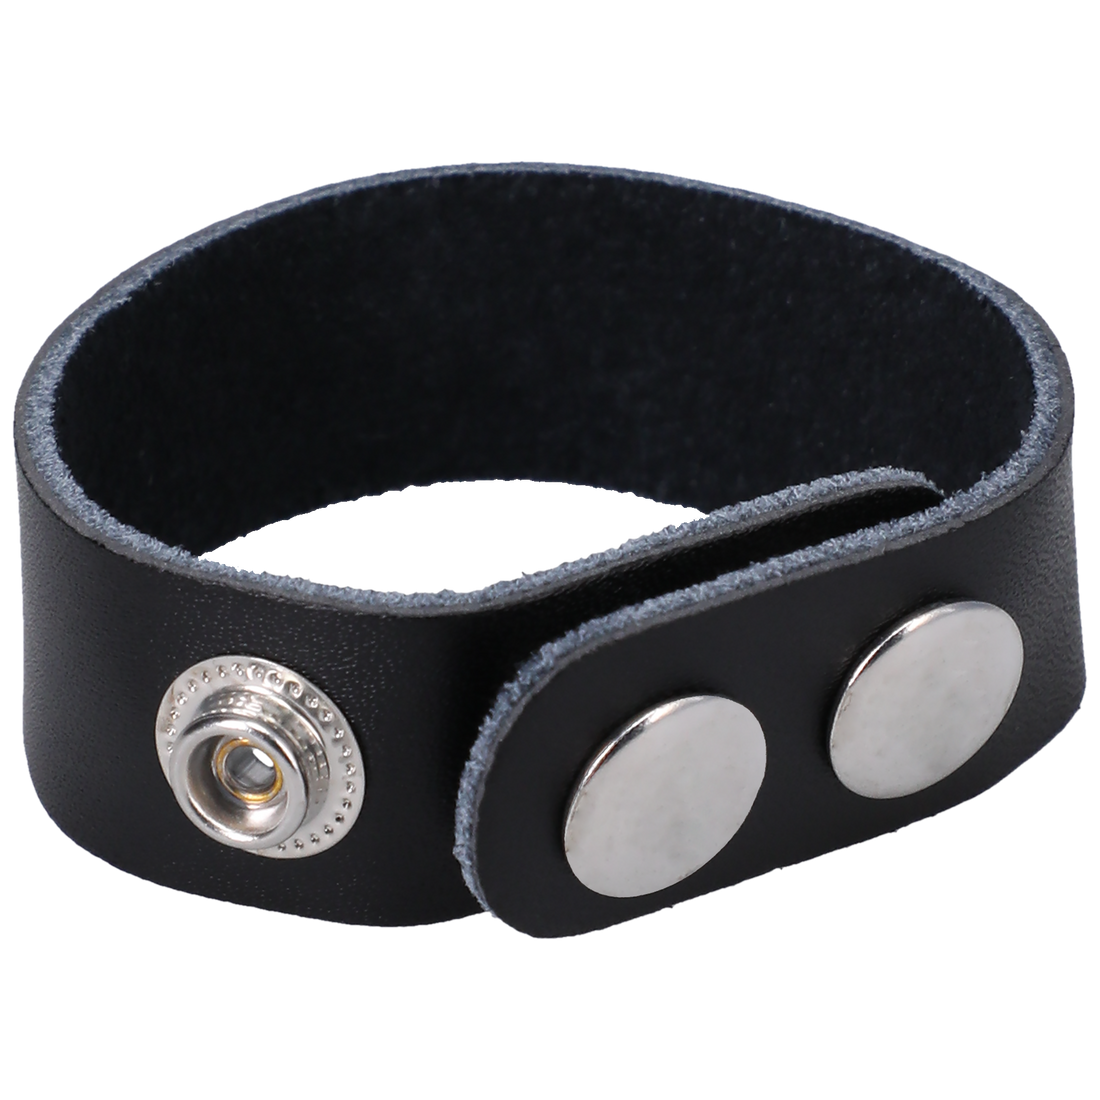 3-SNAP (ADJUSTABLE) LEATHER